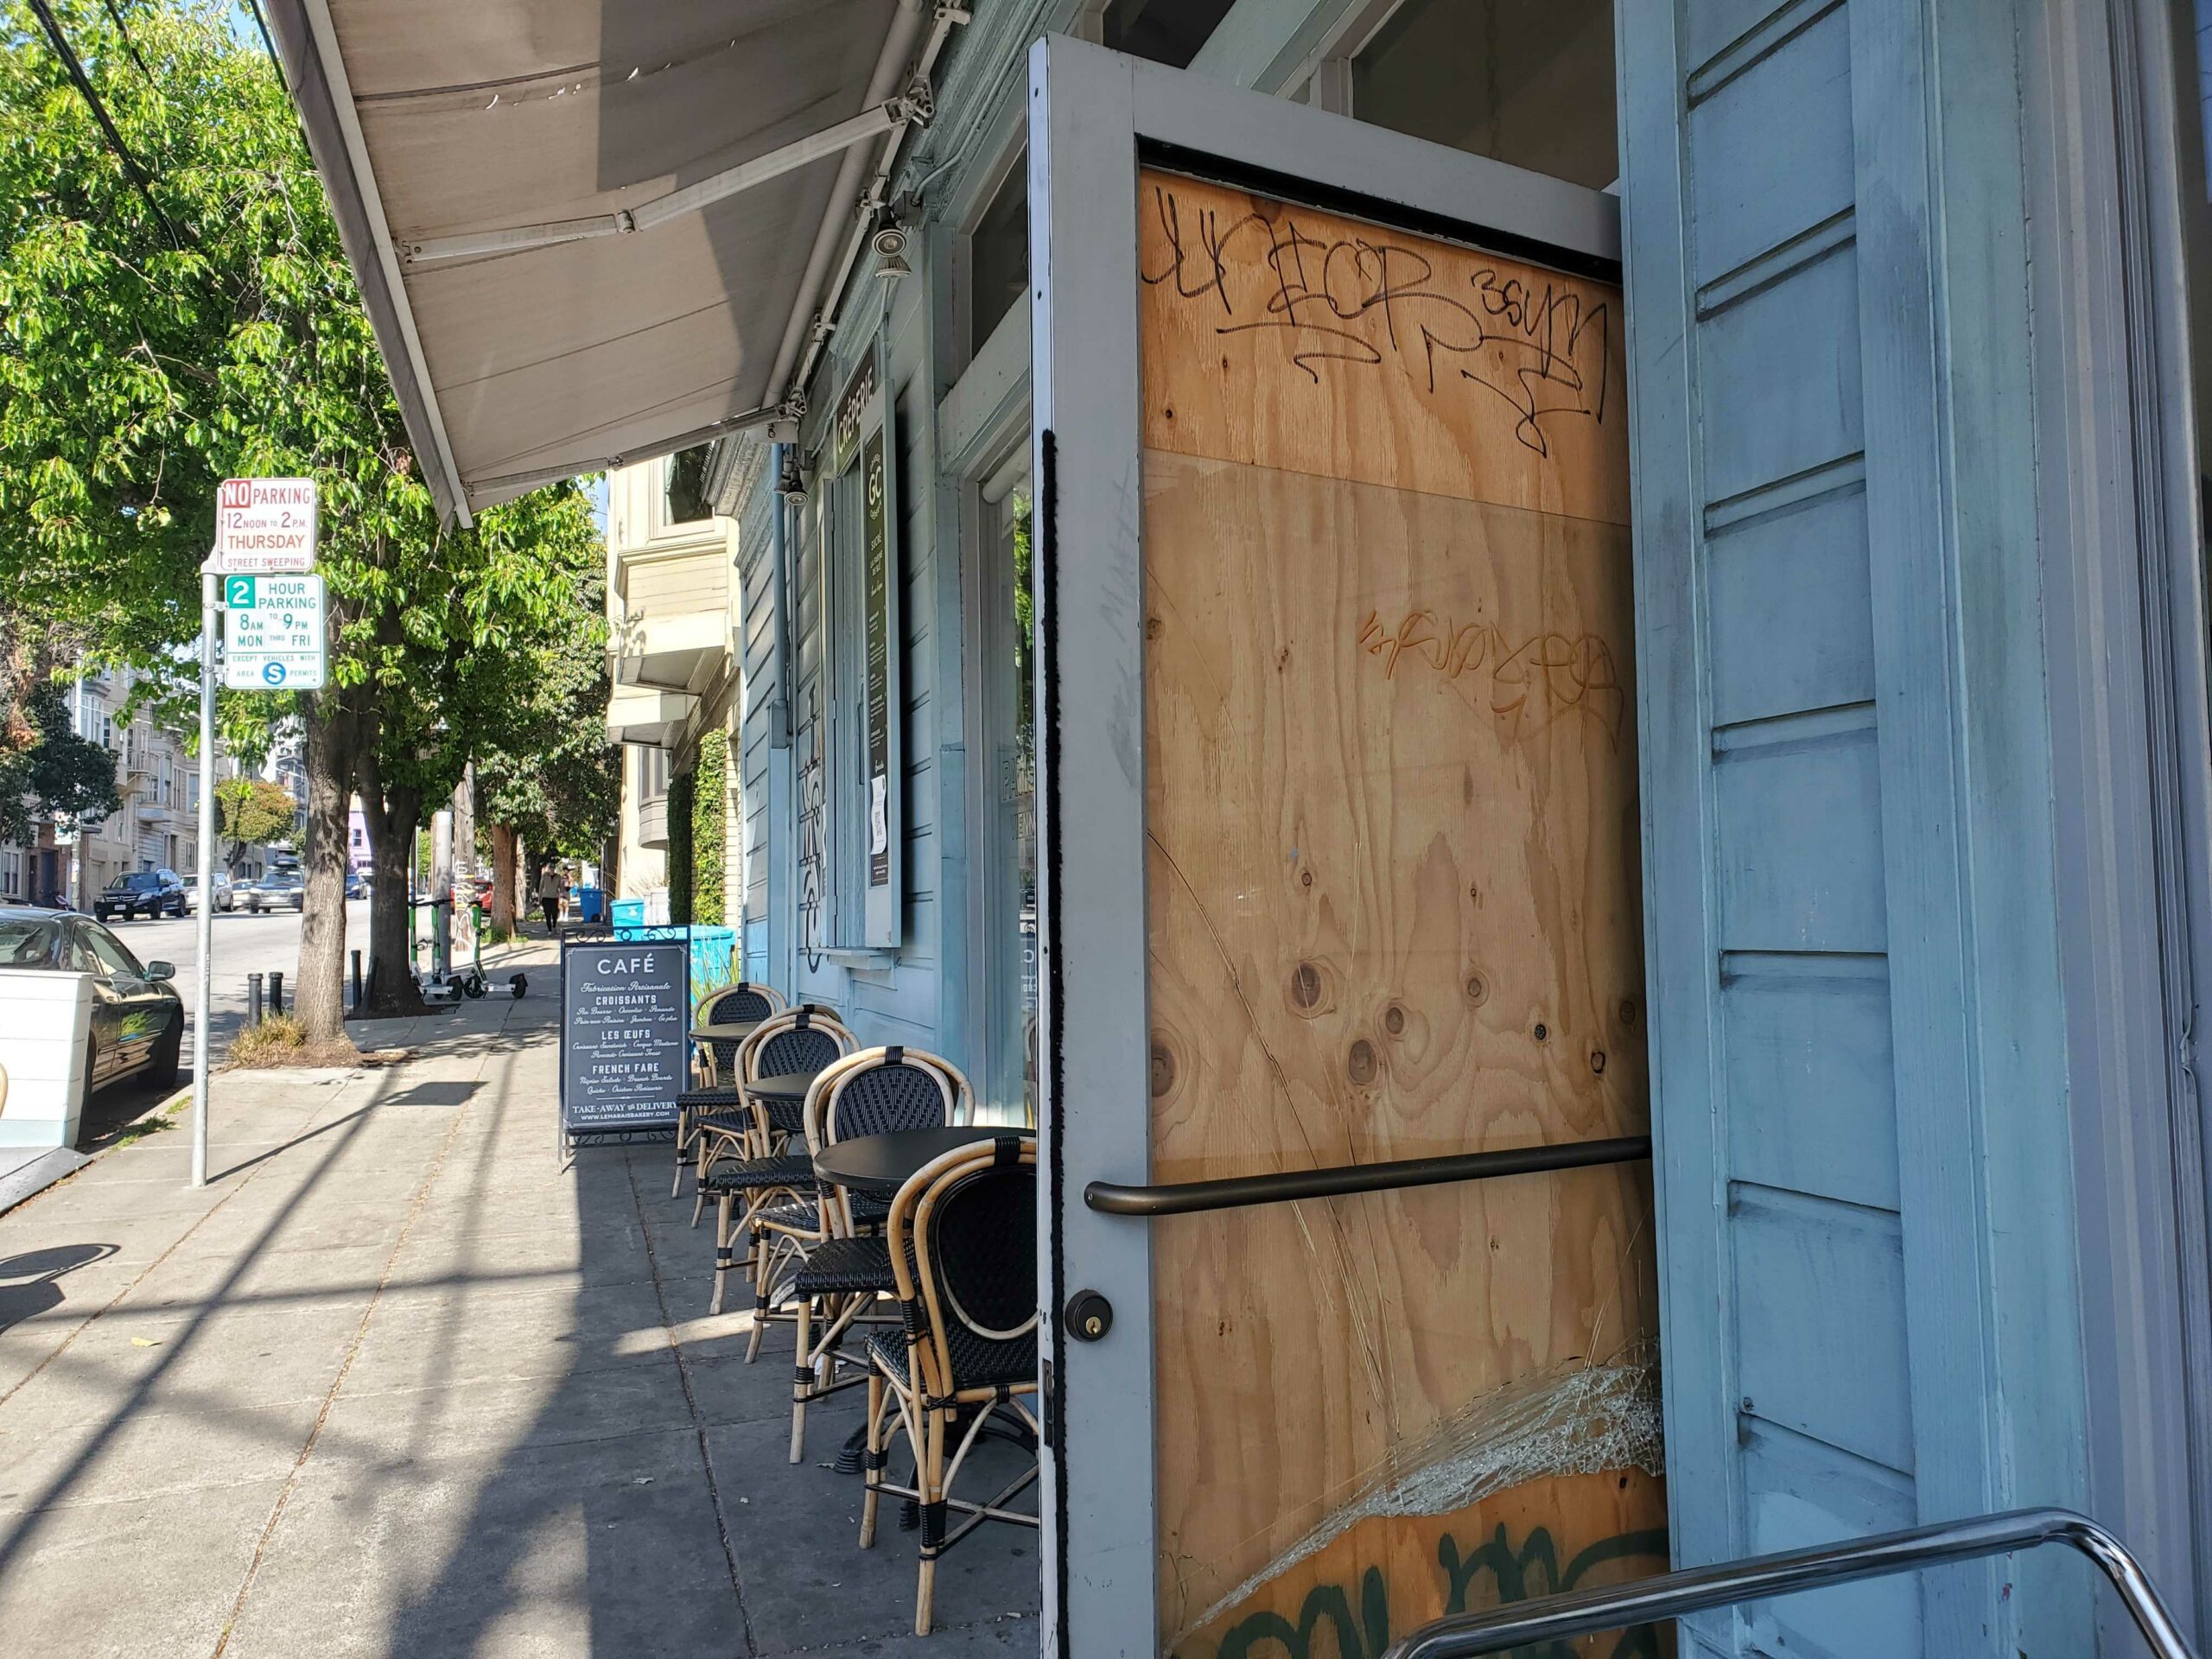 San Francisco Bakery Owner Still Waiting on City Aid Months After Burglars Smashed Door